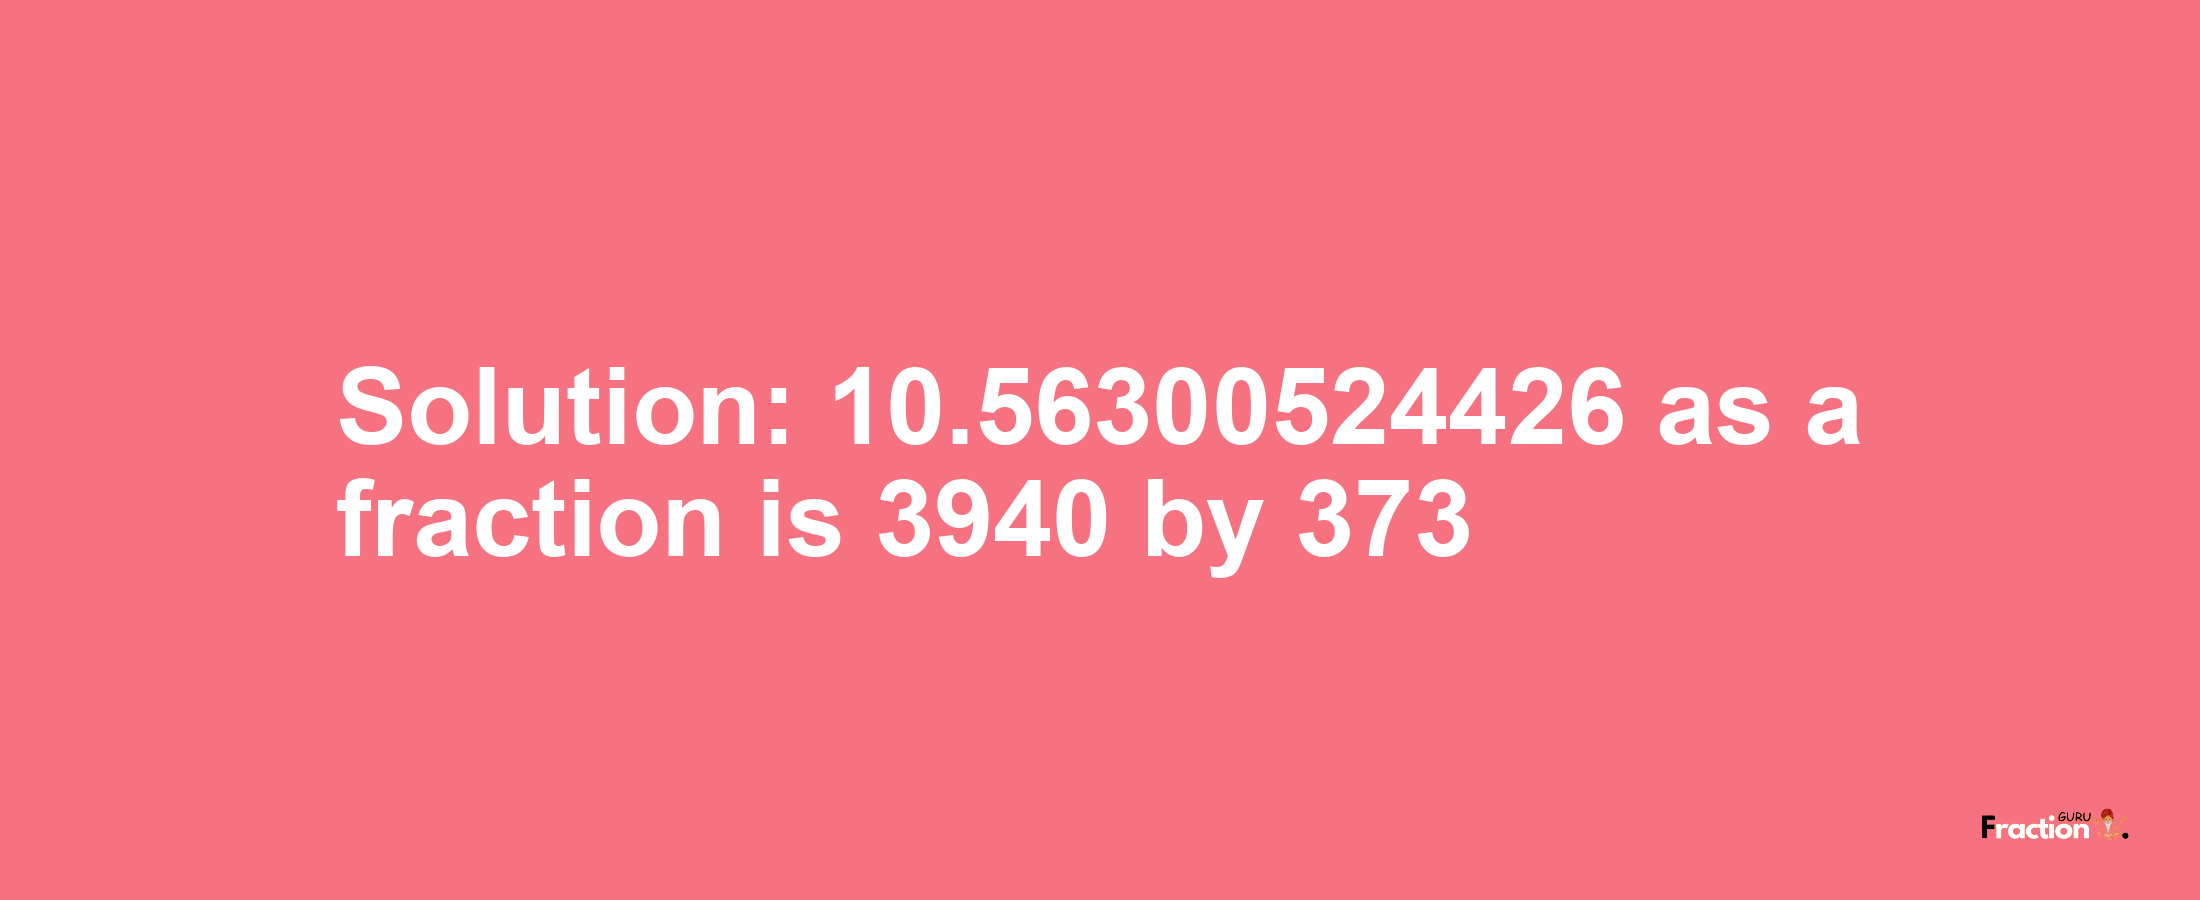 Solution:10.56300524426 as a fraction is 3940/373